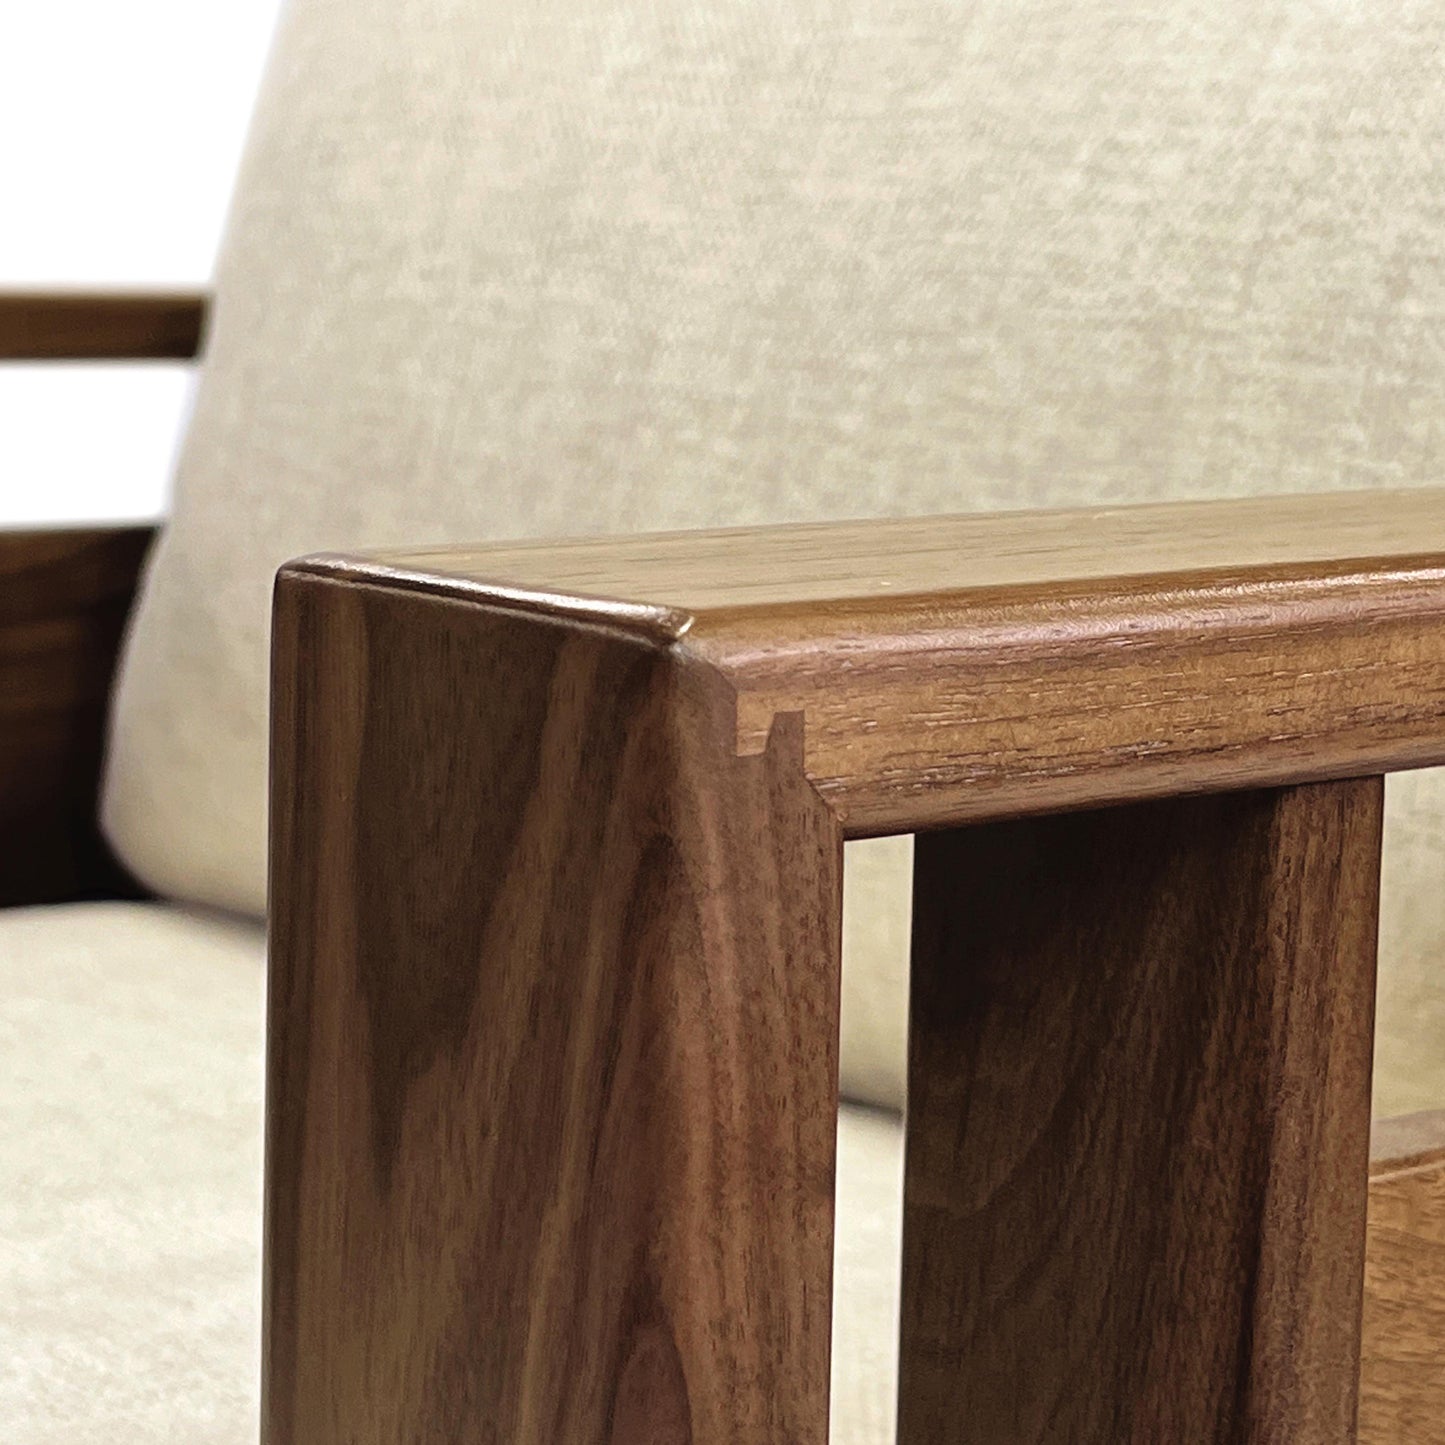 A close up view of a Copeland Furniture Sierra Walnut Upholstered Chair.